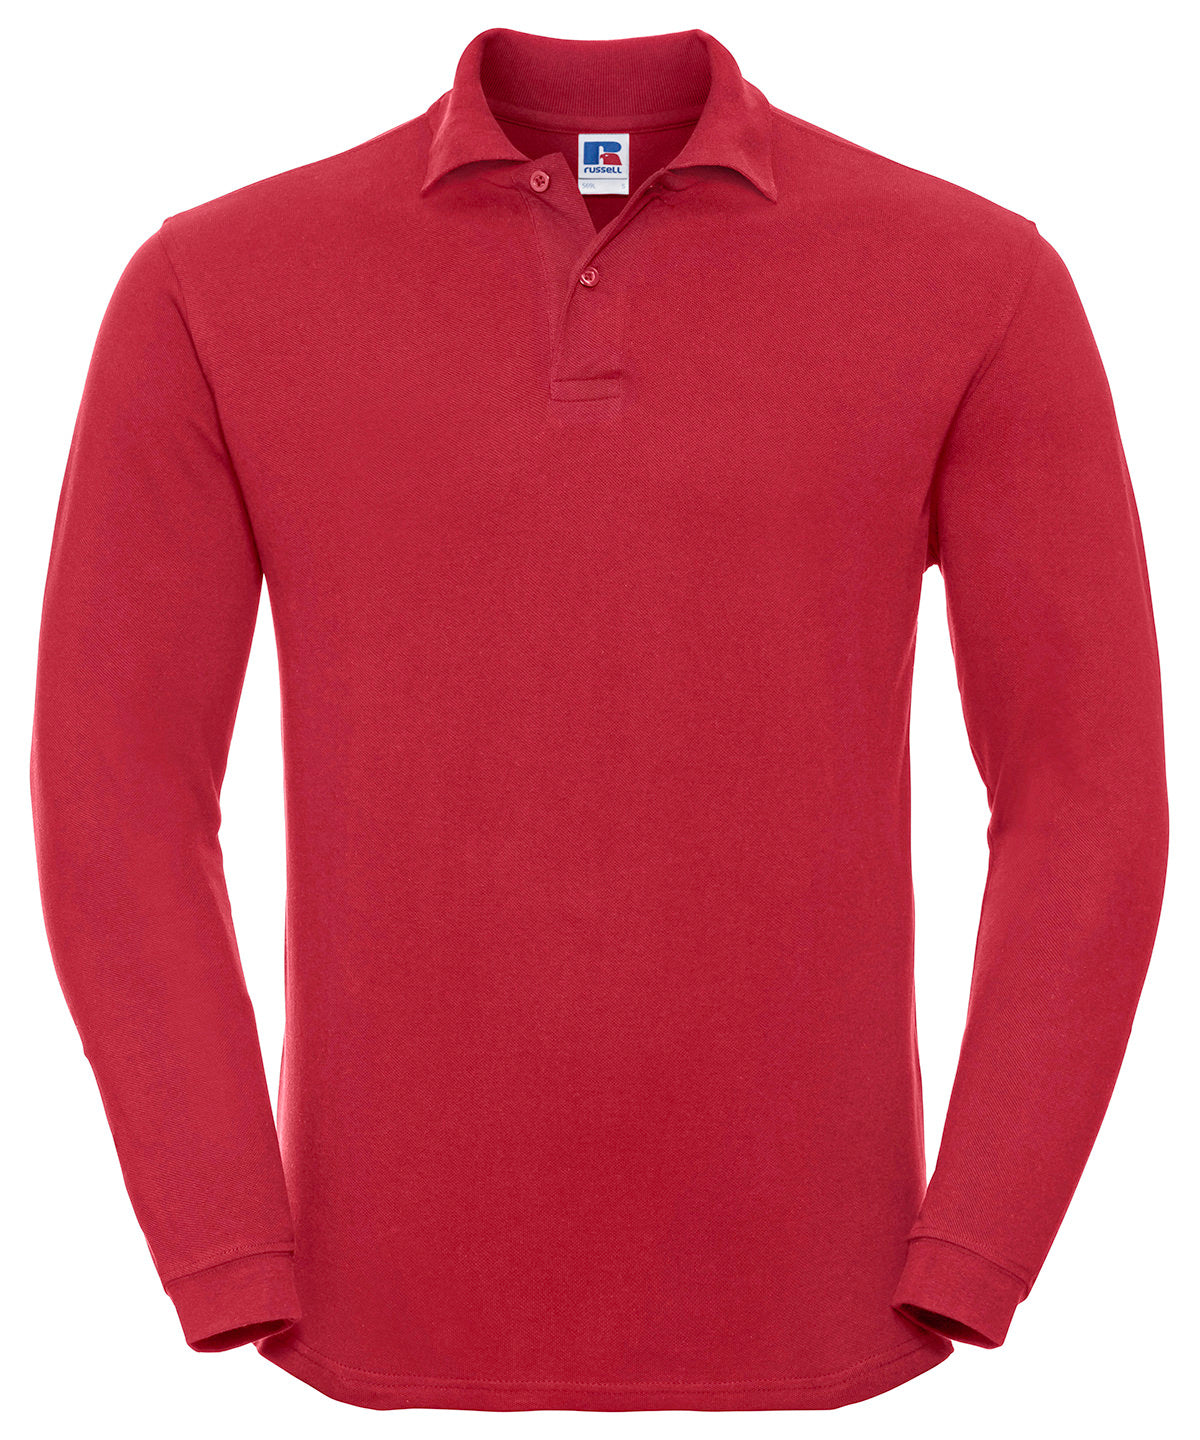 J569L Russell Europe Classic Red Long sleeve classic cotton polo